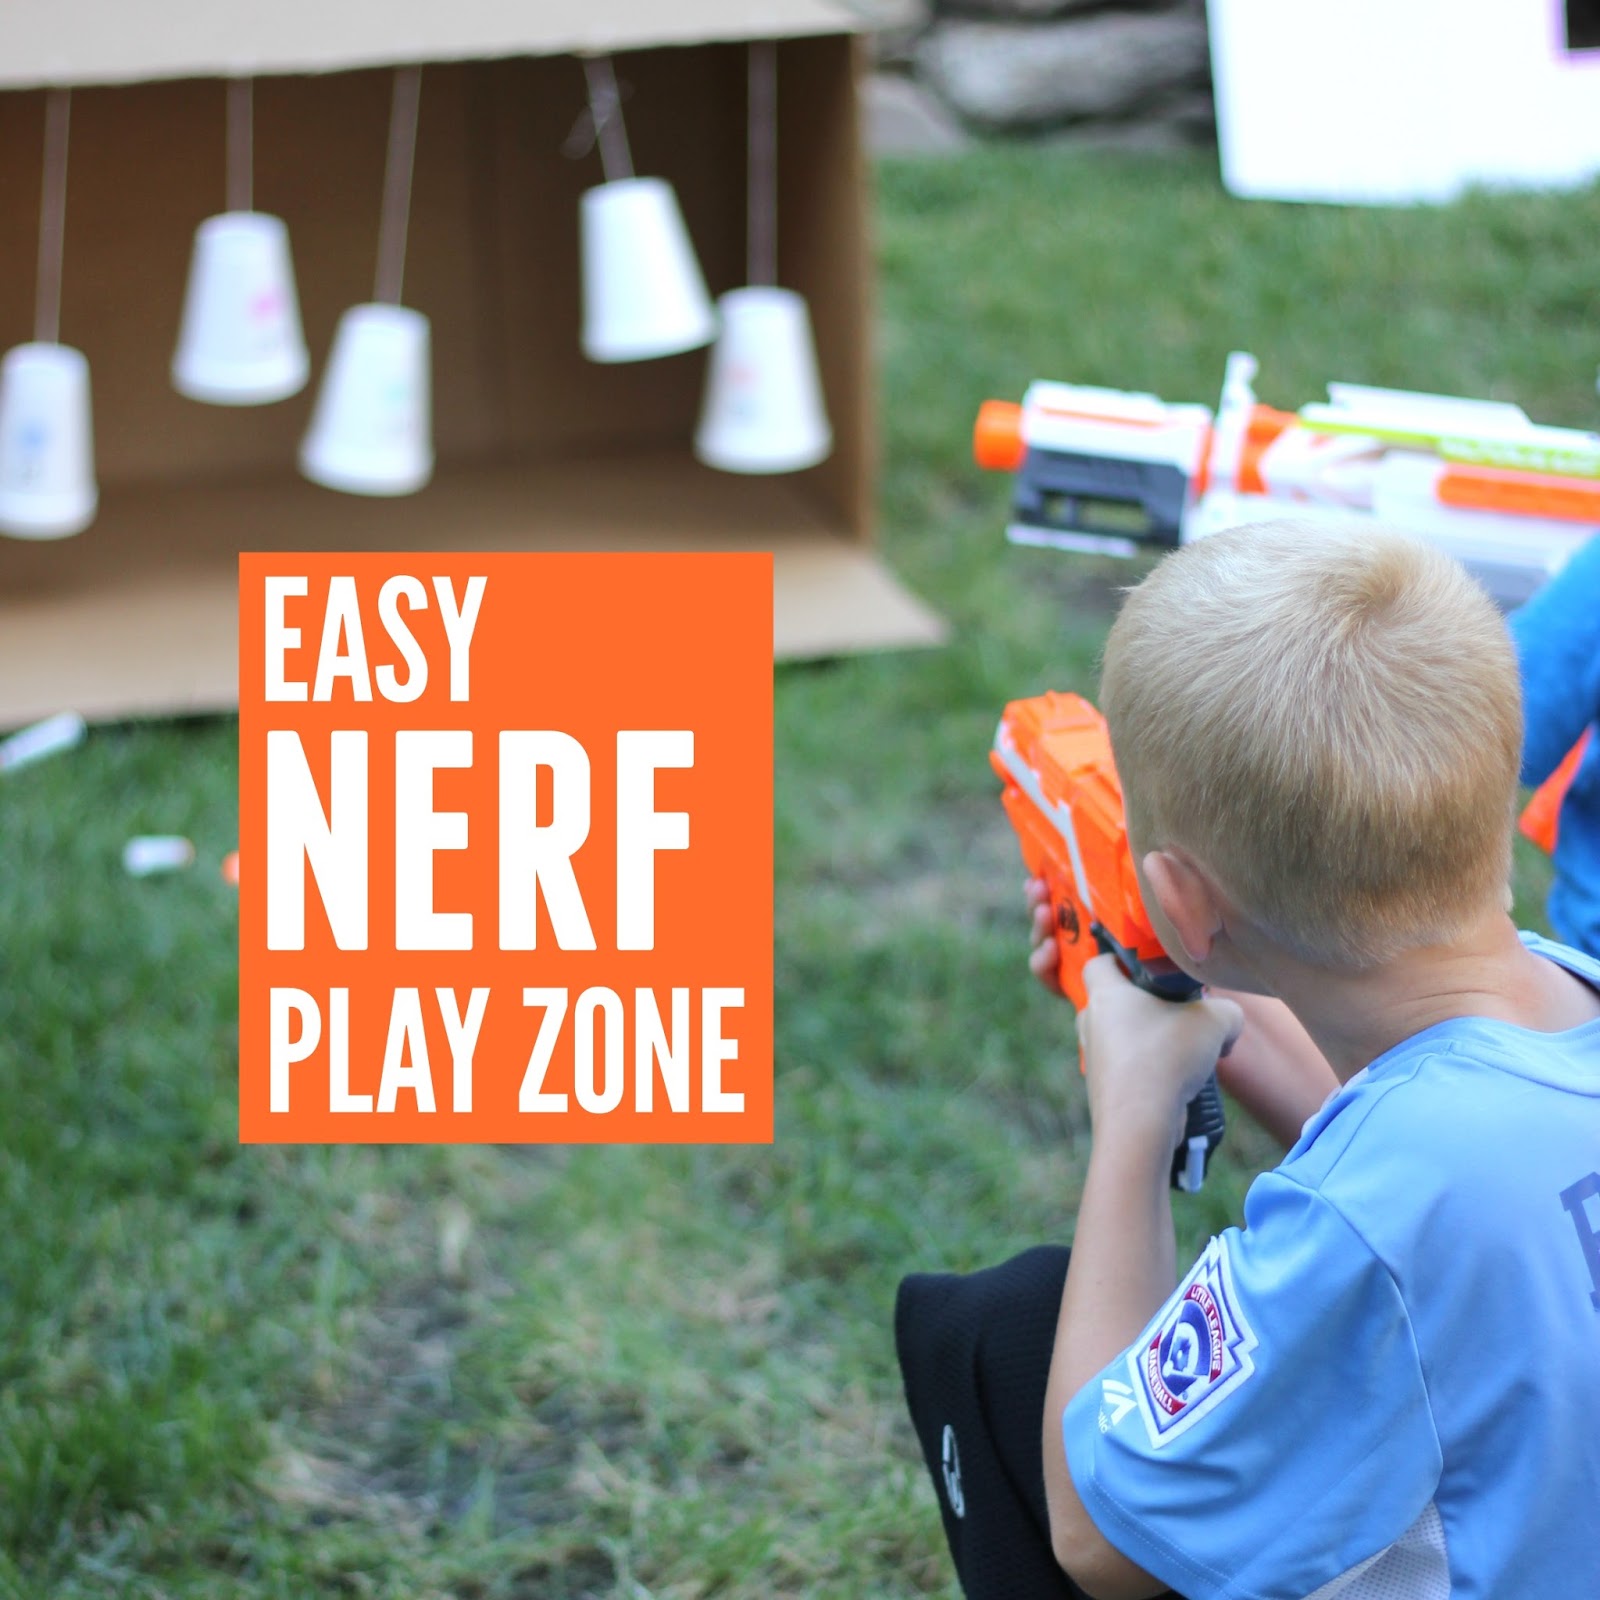 Toddler Approved!: Create a Fantastically Simple NERF Family Play Zone